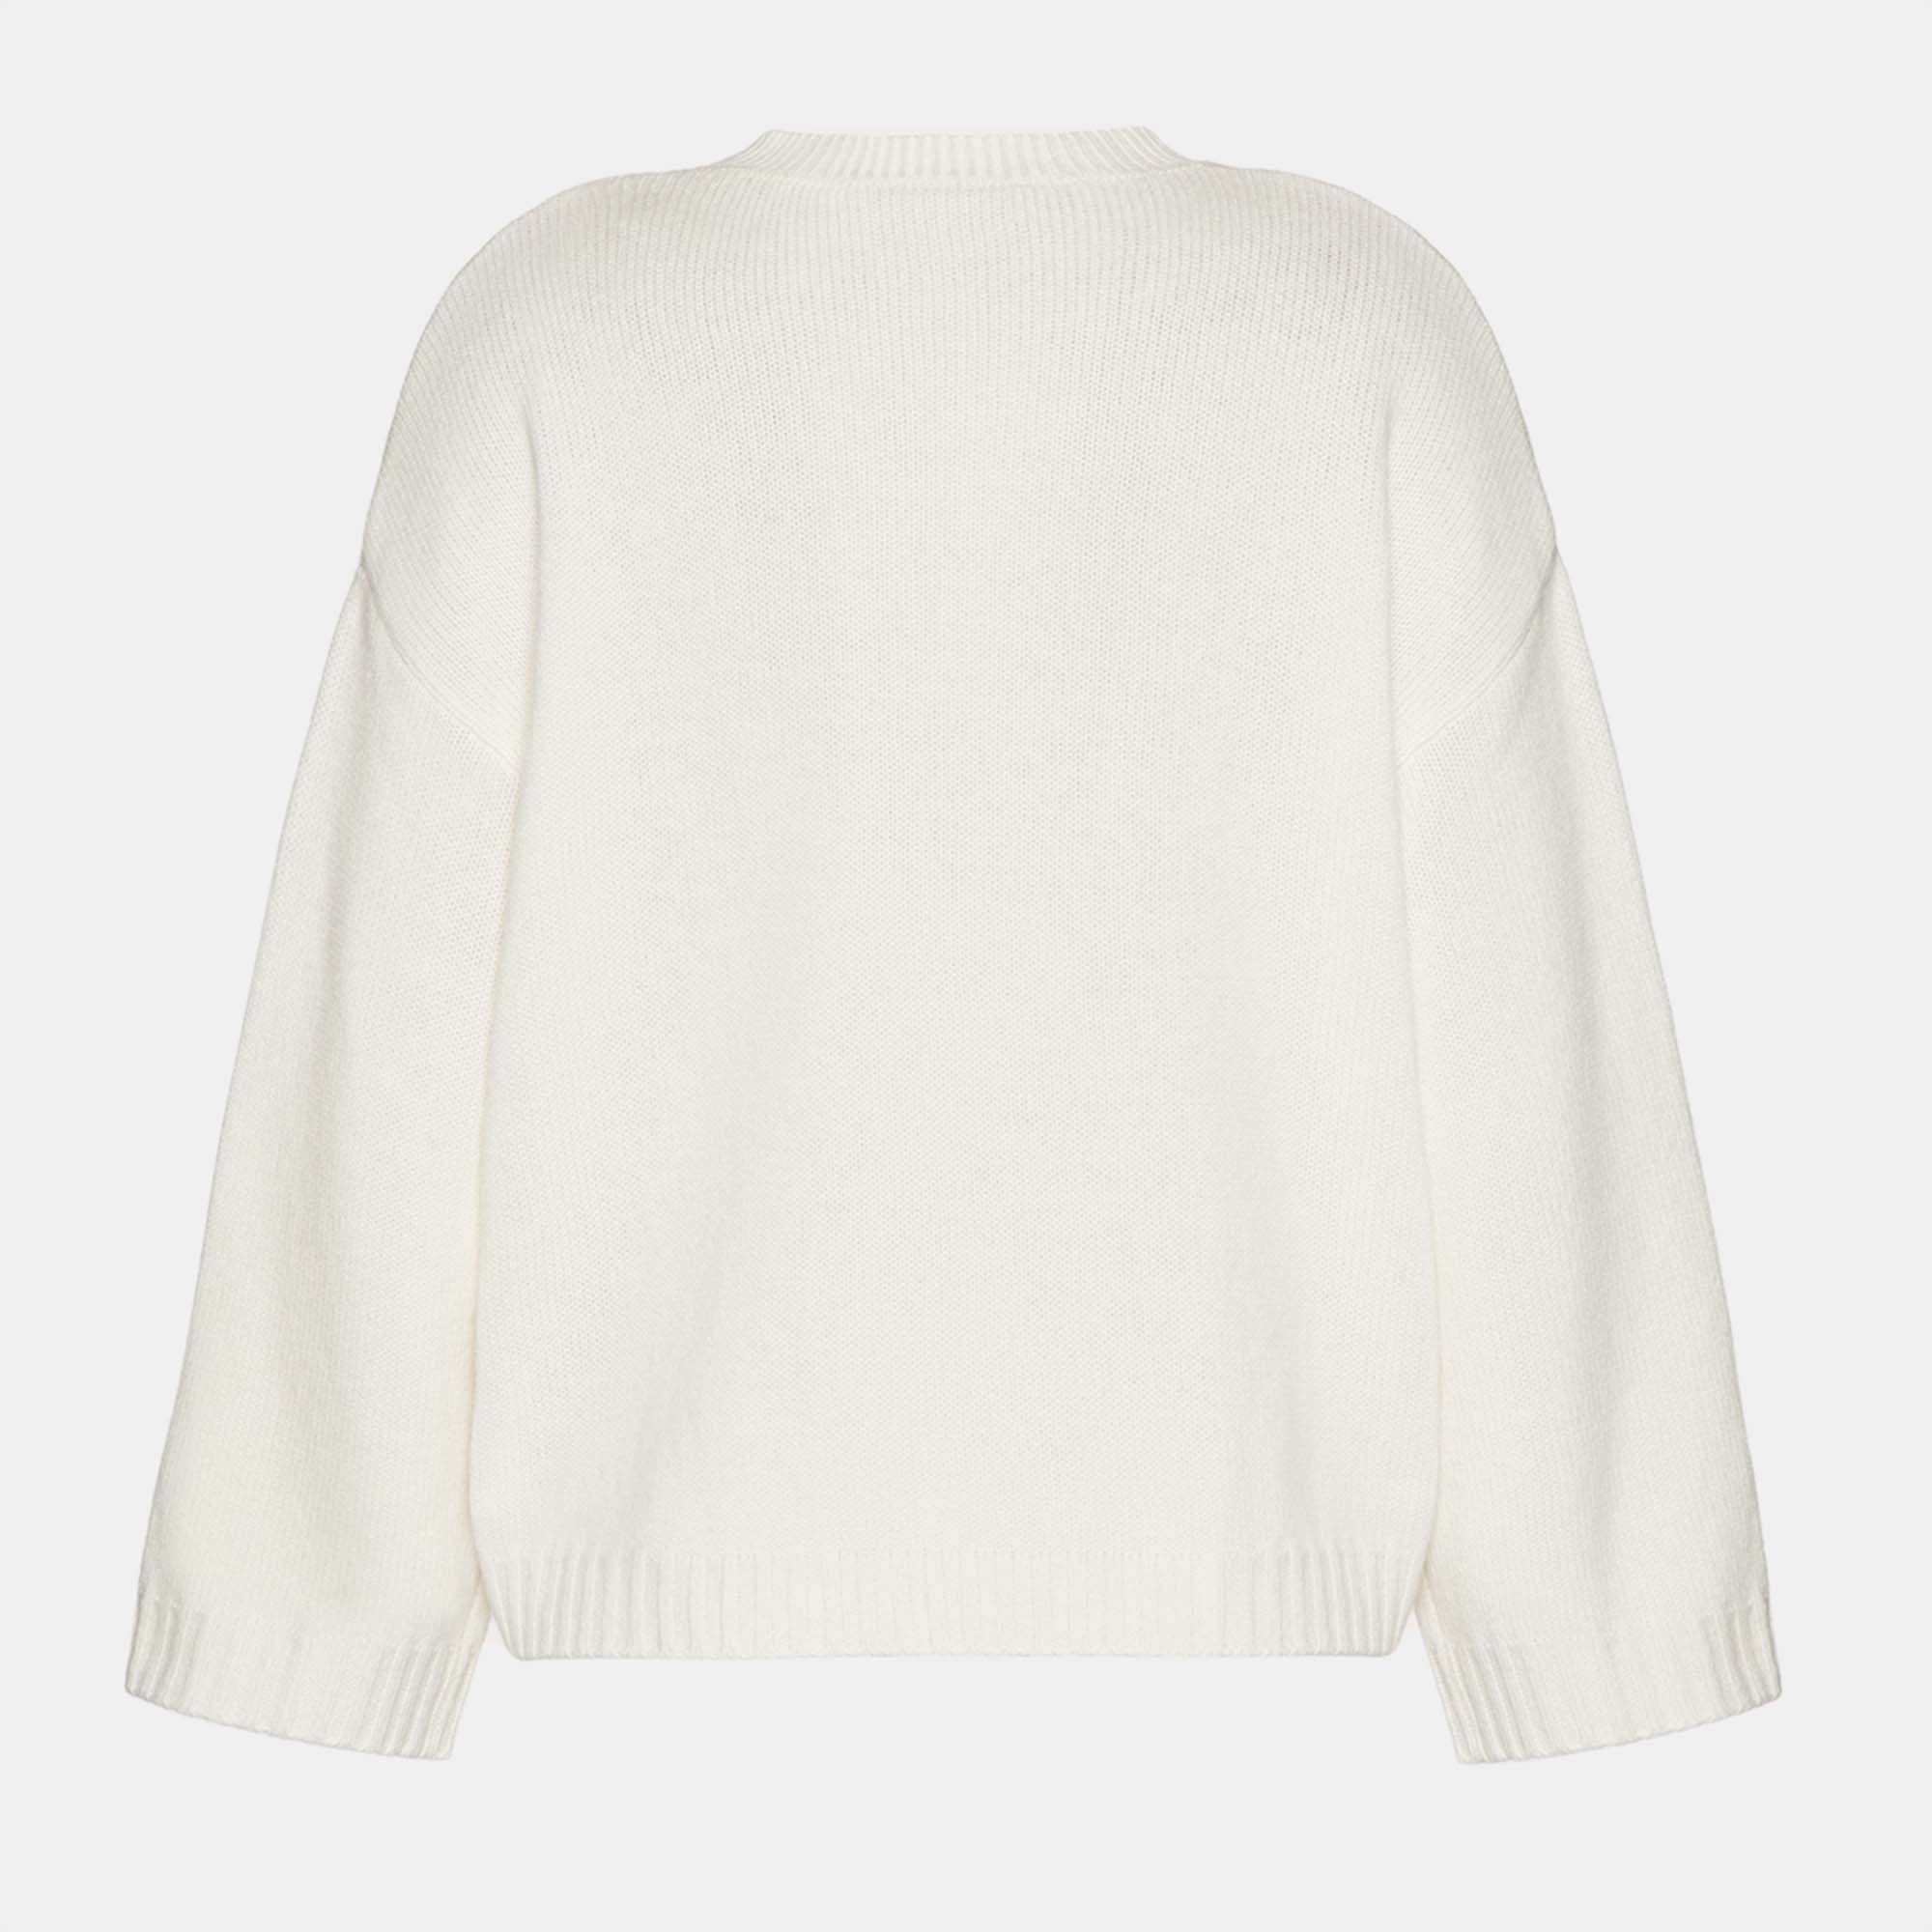 

Valentino Ivory White Knit Floral Detail Top